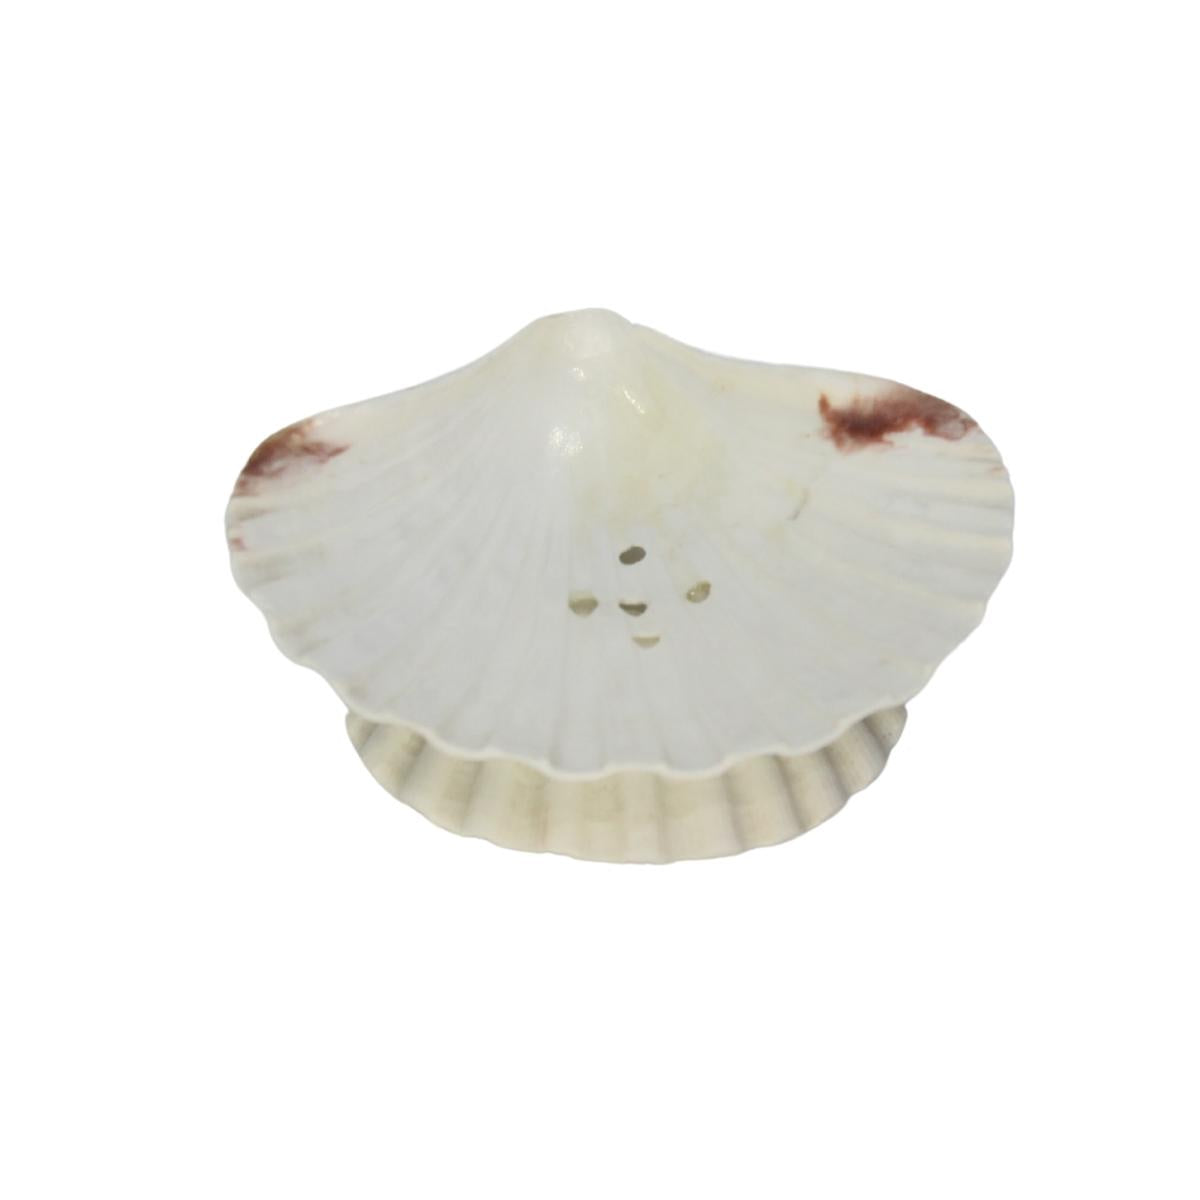 Decorative Seashell Show Pieces For Home Decor Item Soap Agarpathi Stand For Home & Office-Maya Bazaar